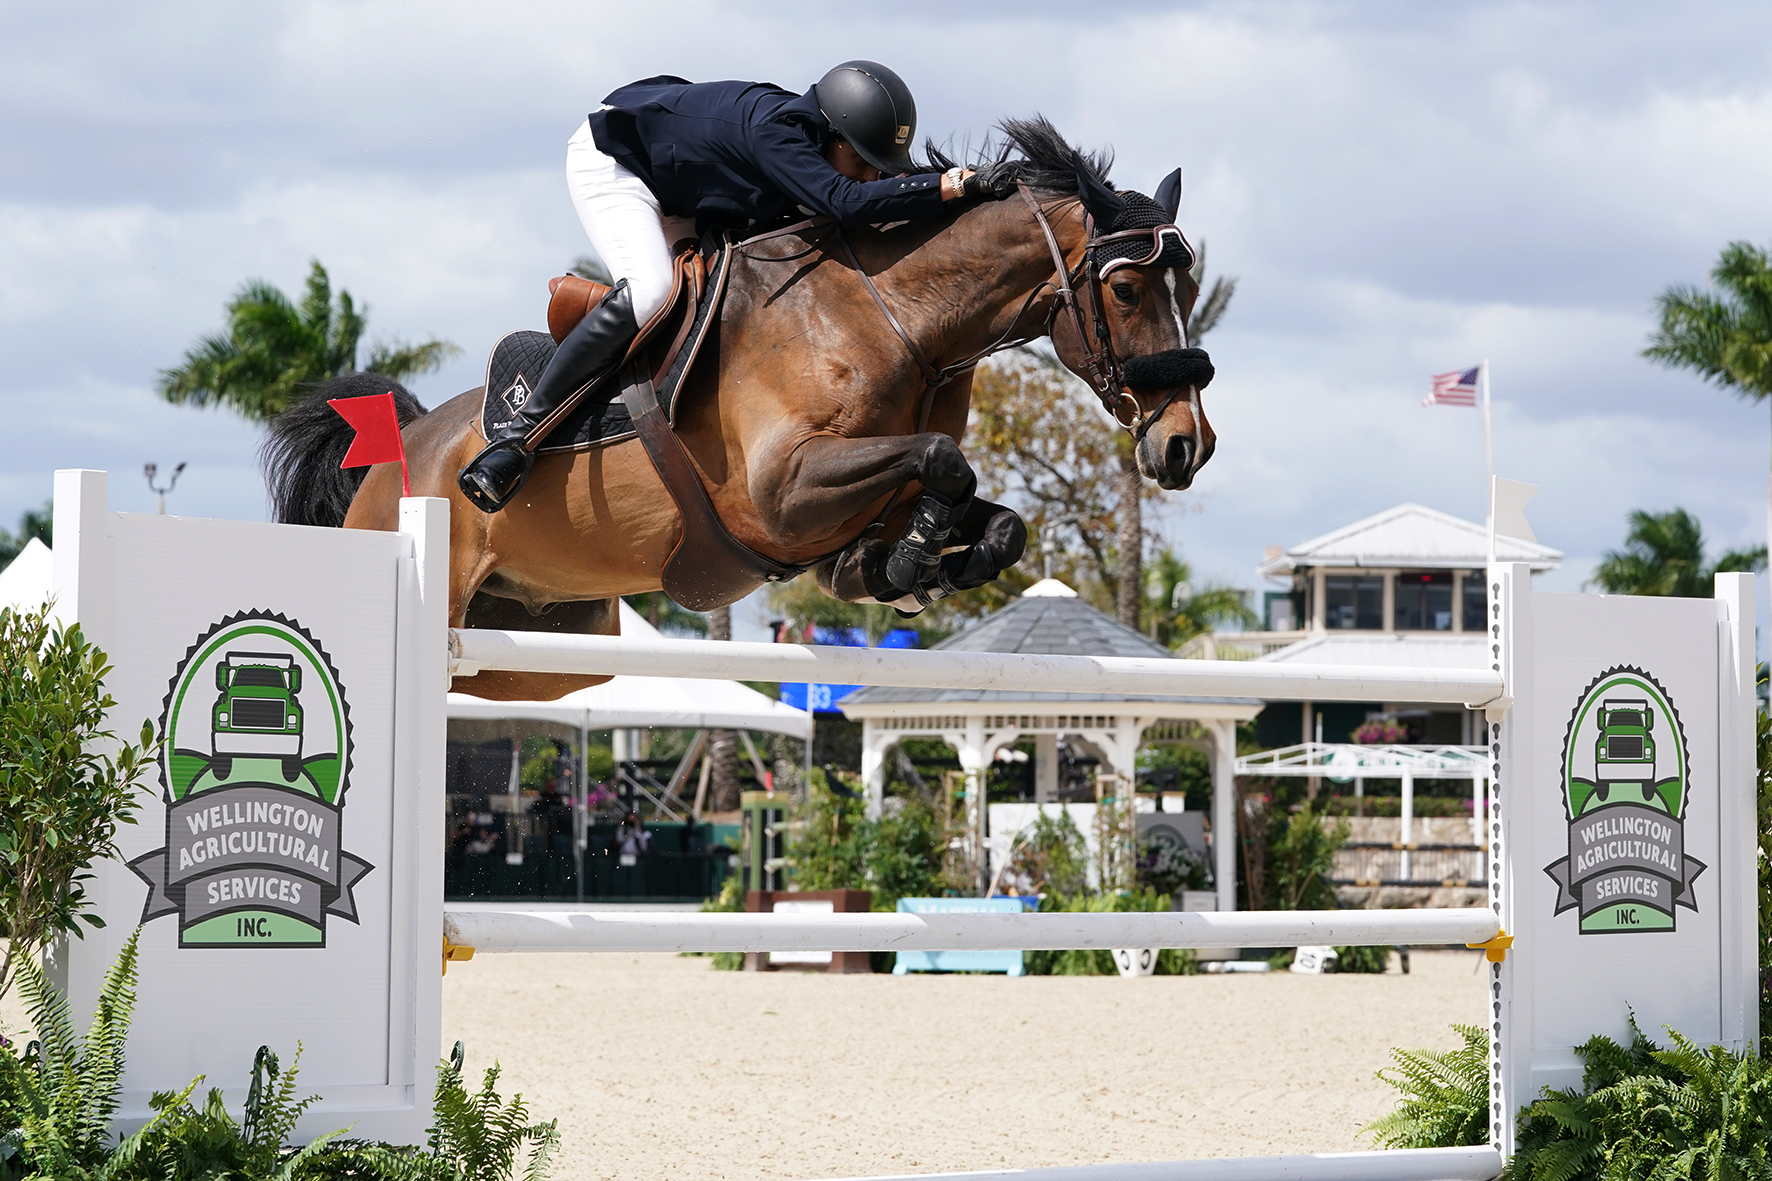 Patience Pays Off for Adam Prudent In the $214,000 Wellington Agricultural Services Grand Prix CSI4